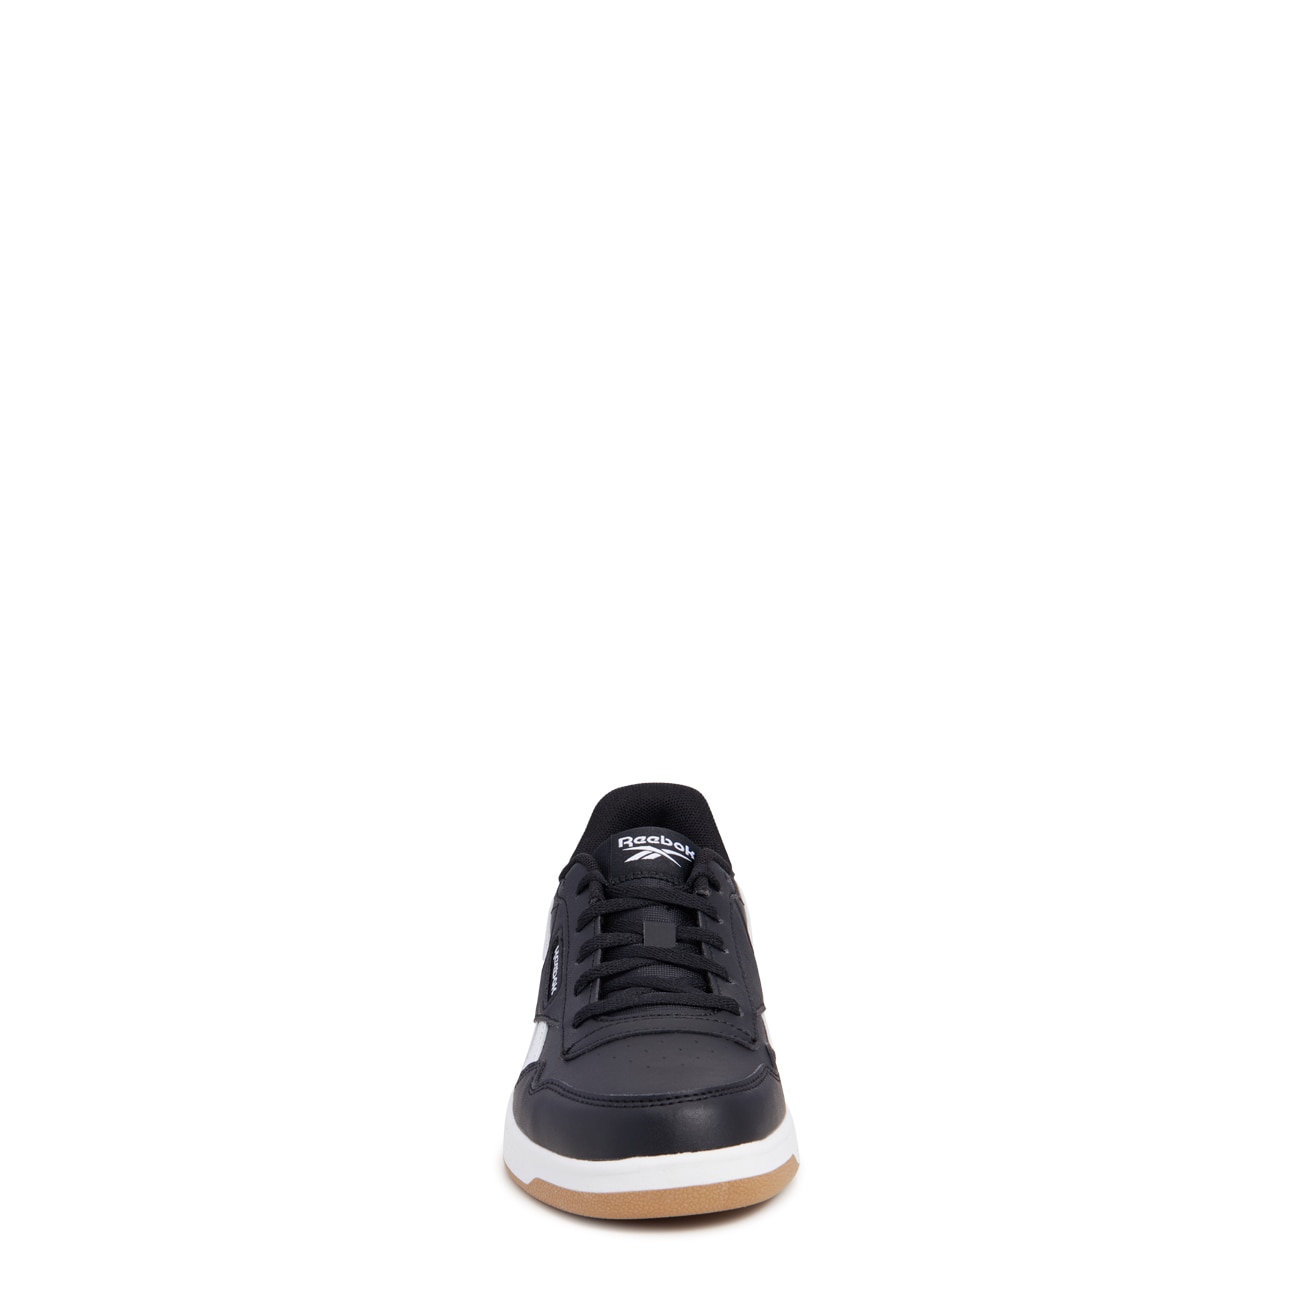 Youth Boys' Court Advance Sneaker